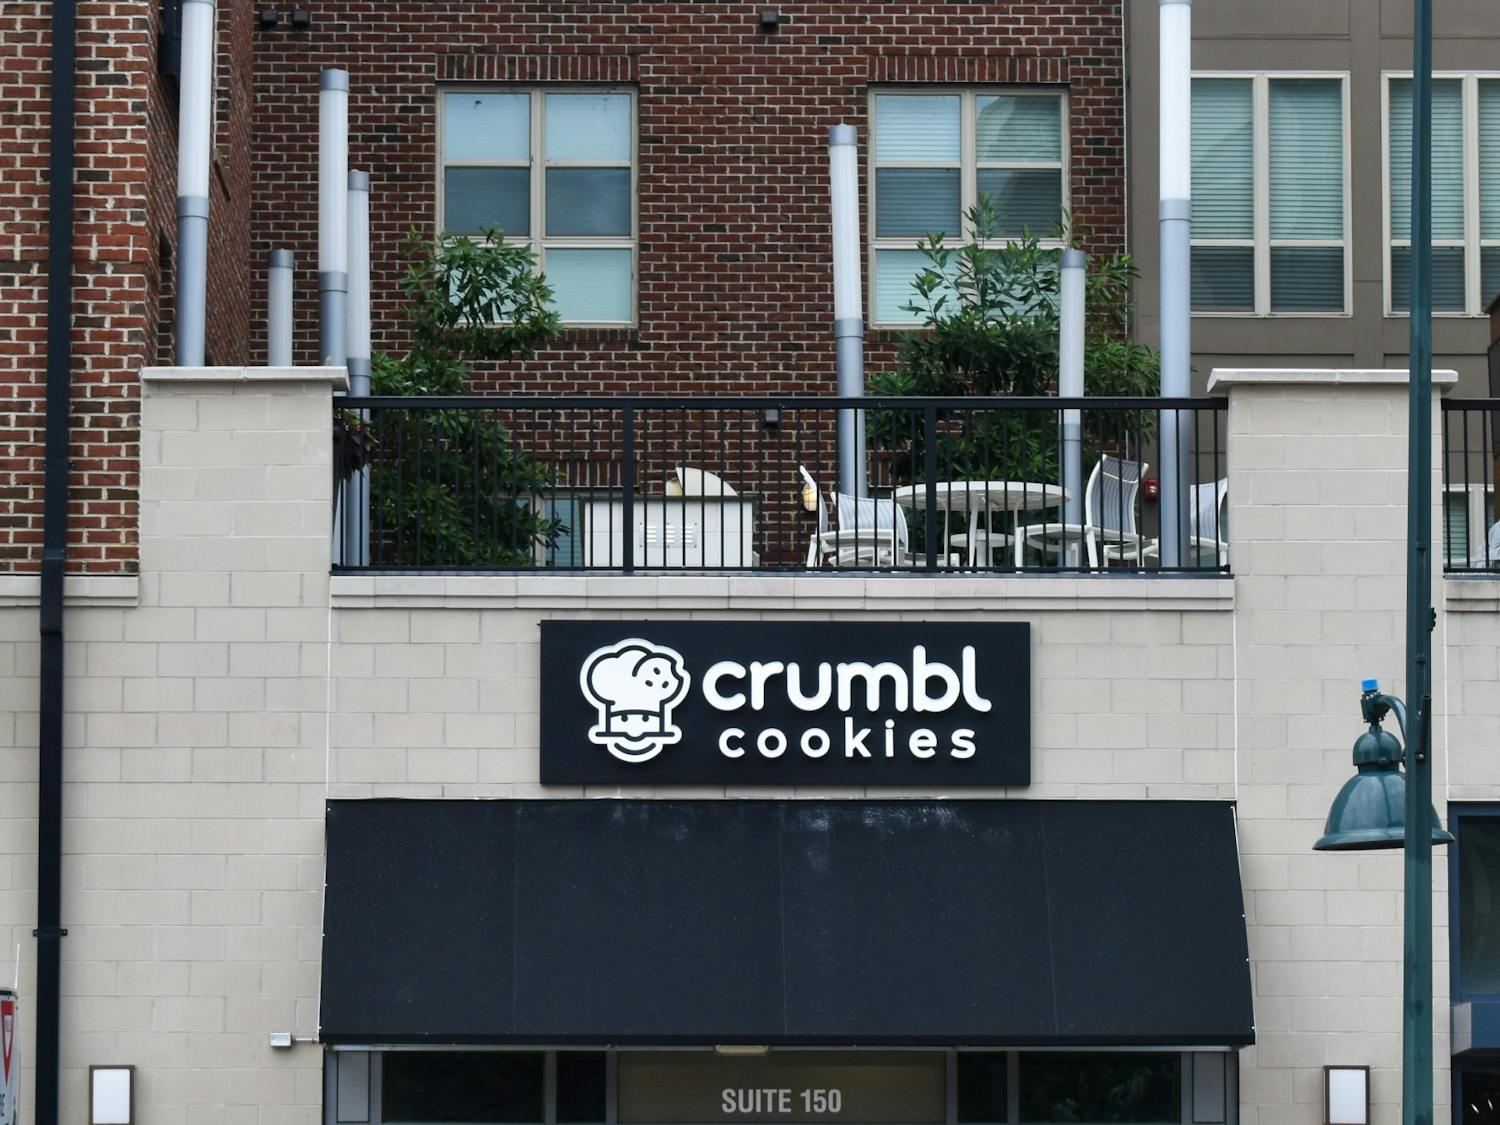 The new Crumbl Cookies sign located on Franklin Street on Wed. July 13, 2022.